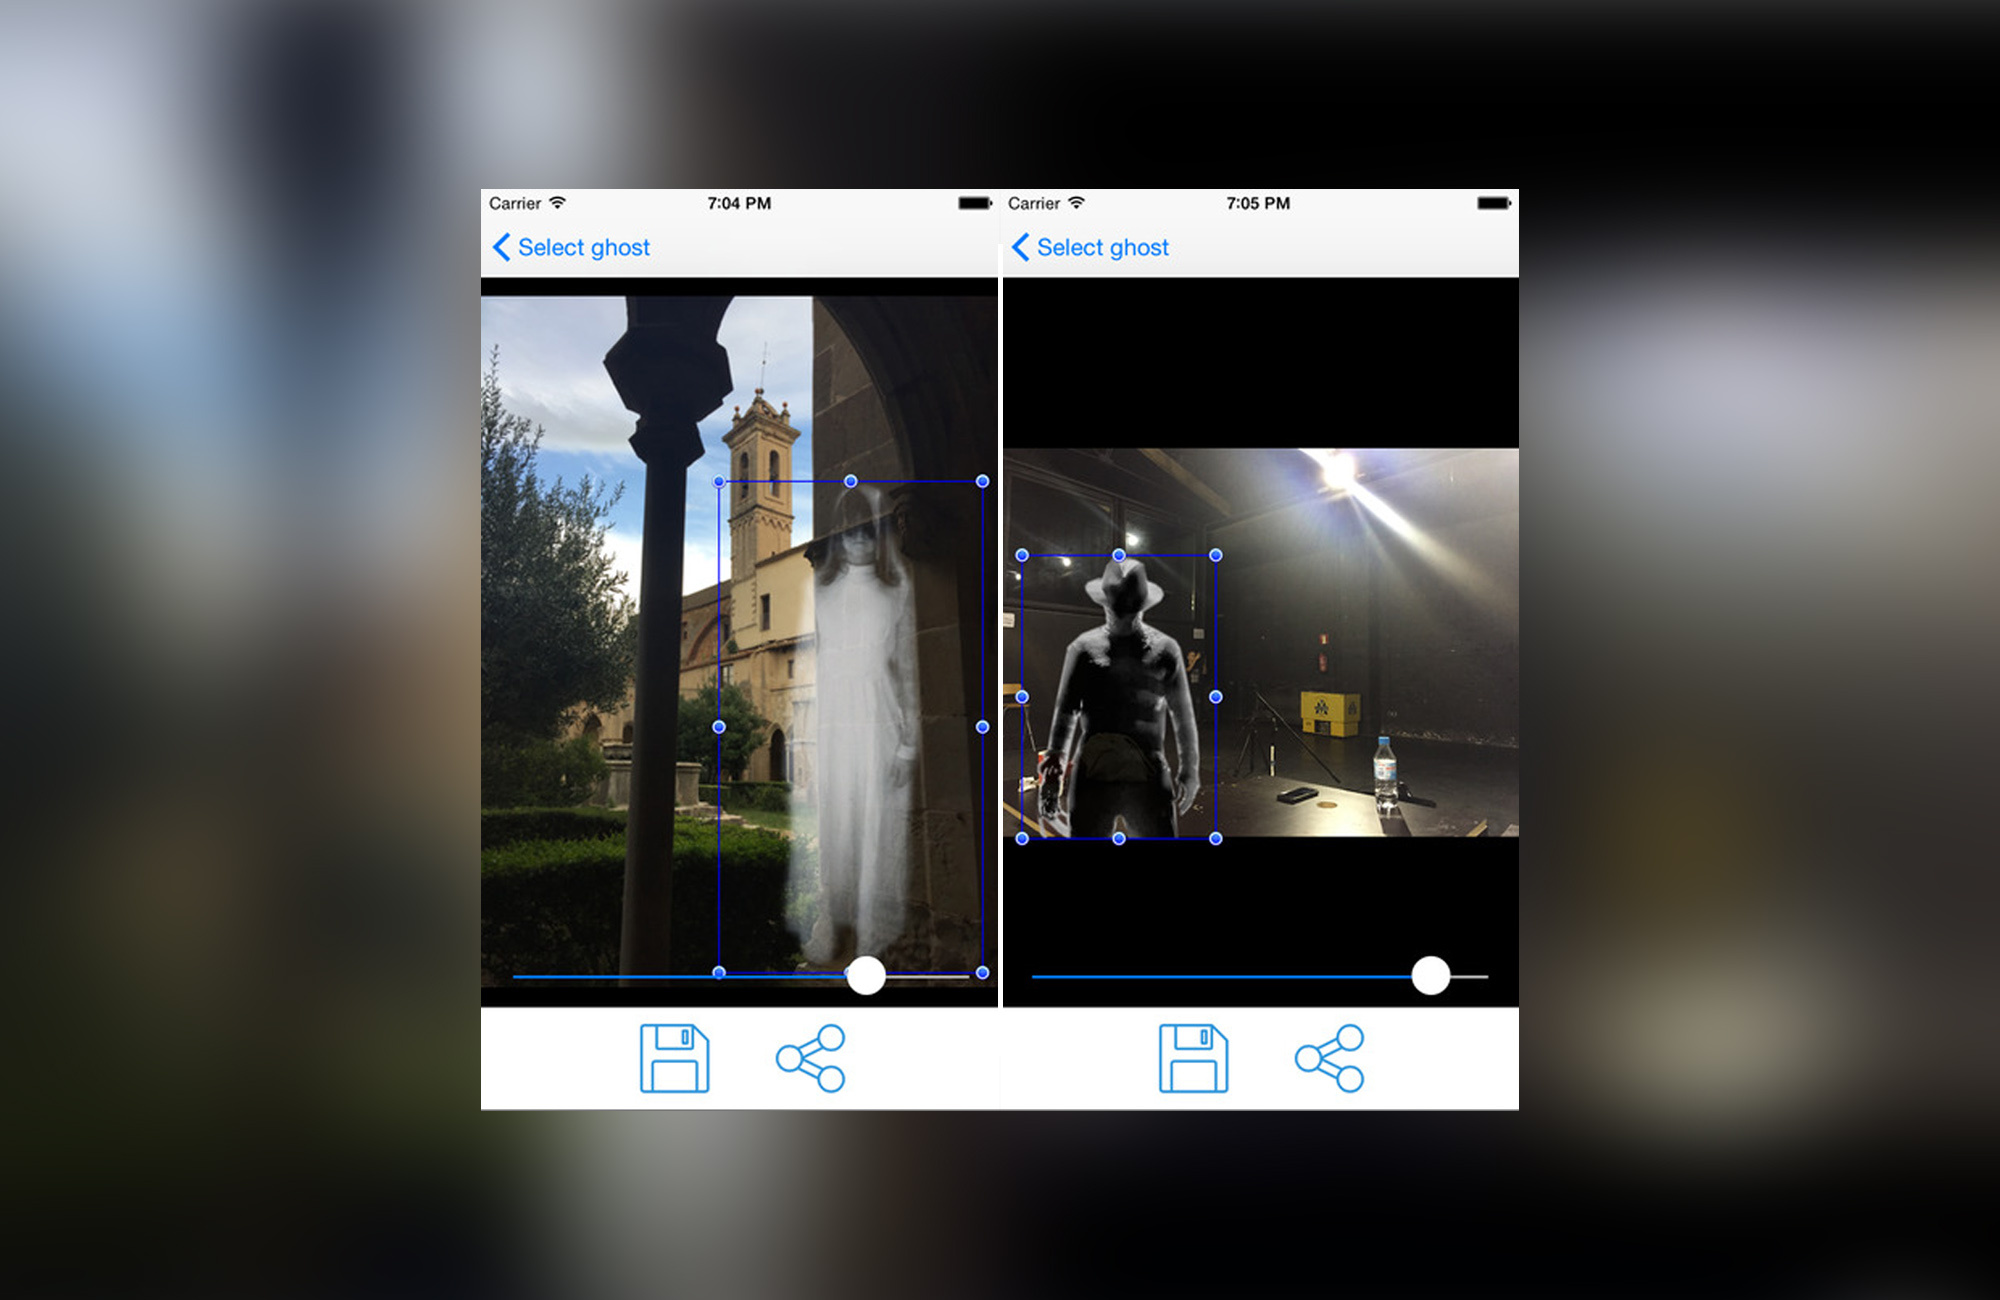 PHOTO: GhostCam Camera FX by ioApps Mobile Solutions S.L. allows you to add ghostly apparitions to your photos.